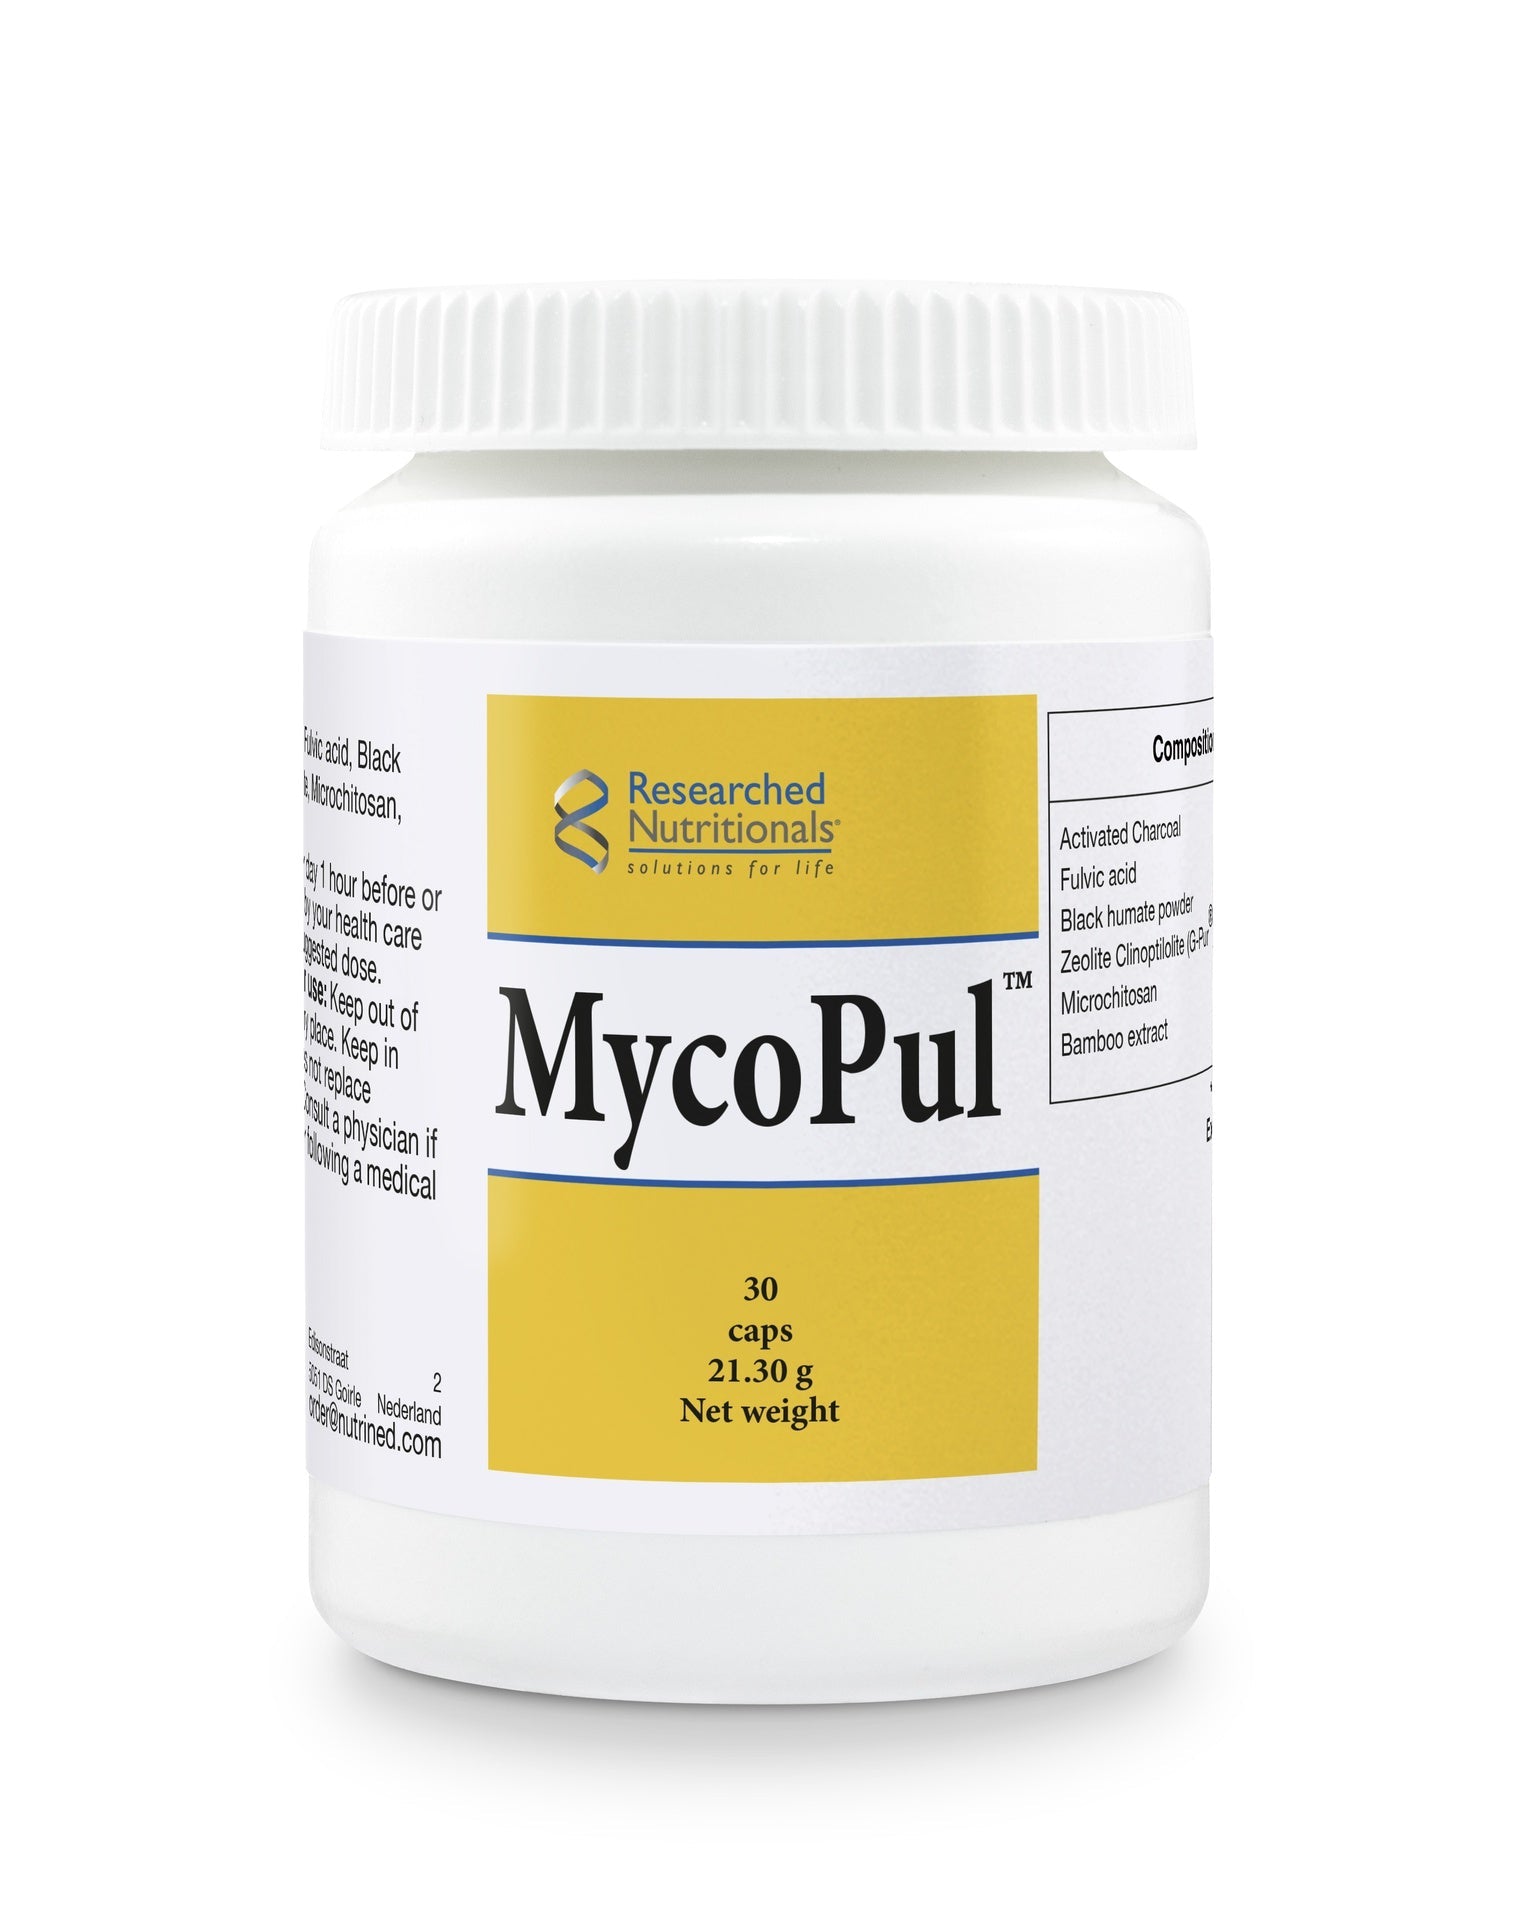 MycoPul - 30 Capsules | Researched Nutritionals